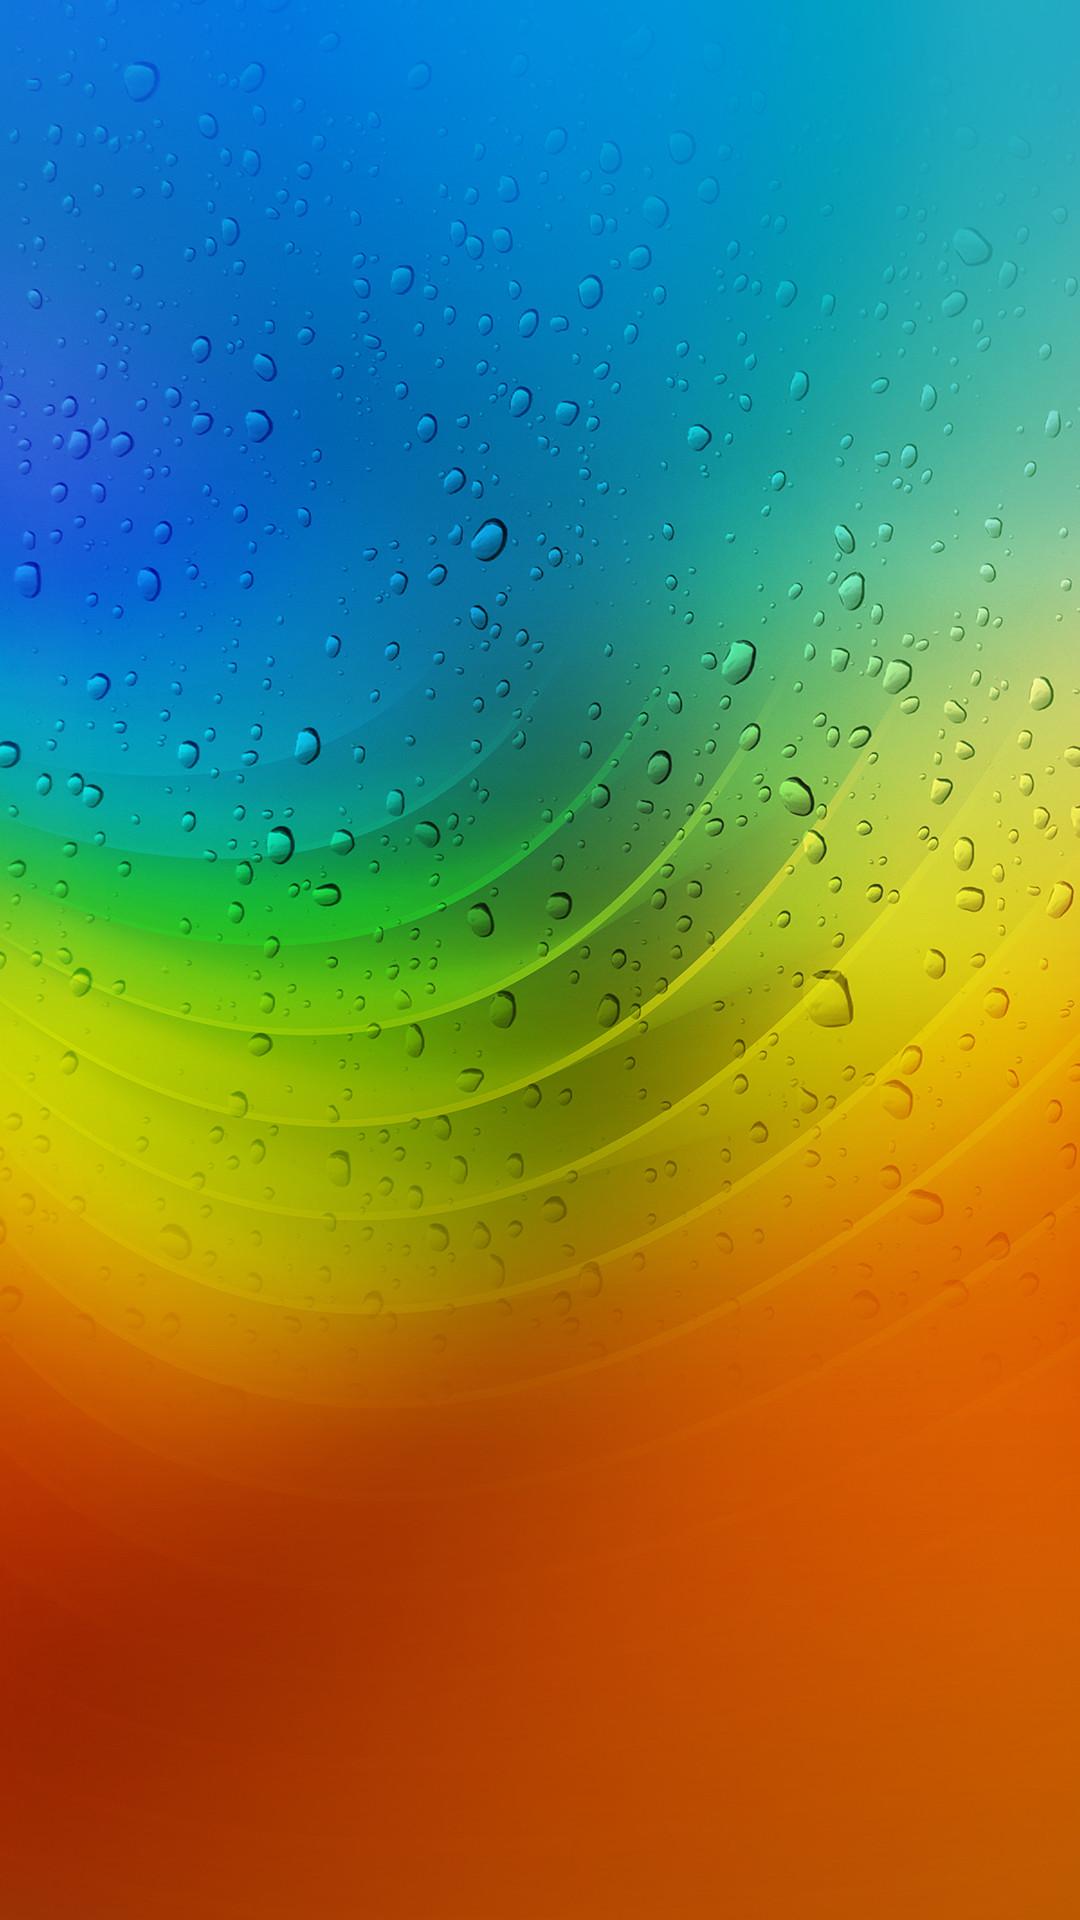 Wallpaper Of Water Droplets